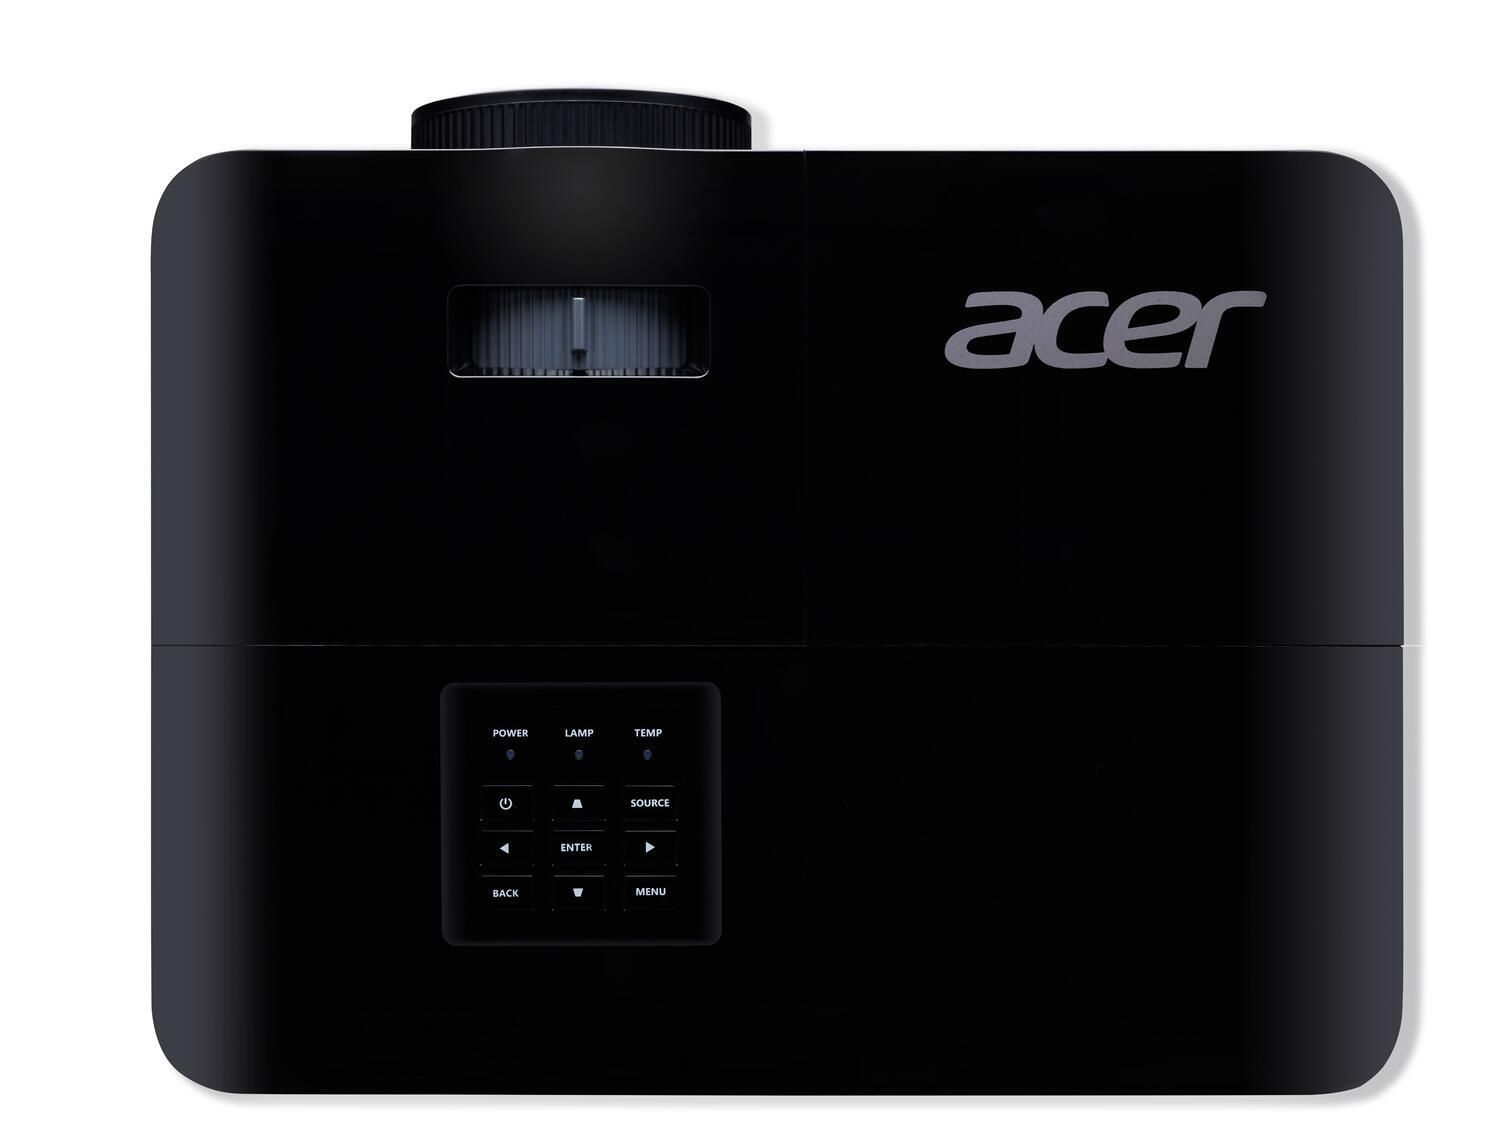 Proiector ACER X128HP/ BS-112P, DLP, XGA 1024*768, up to WUXGA 1920x1200, 4000 lumeni, 3D ready, 4:3 nativ, 16:9 compatibil, 20.000:1, lampa 6.000 ore/ 10.000 ore ExtremeEco, D-sub, HDMI, PC audio in/ out, composite RCA, USB type A, RS232, DC out 5V, greutate 2.8 kg, Acer ColorBoost3D, boxa 3W_6